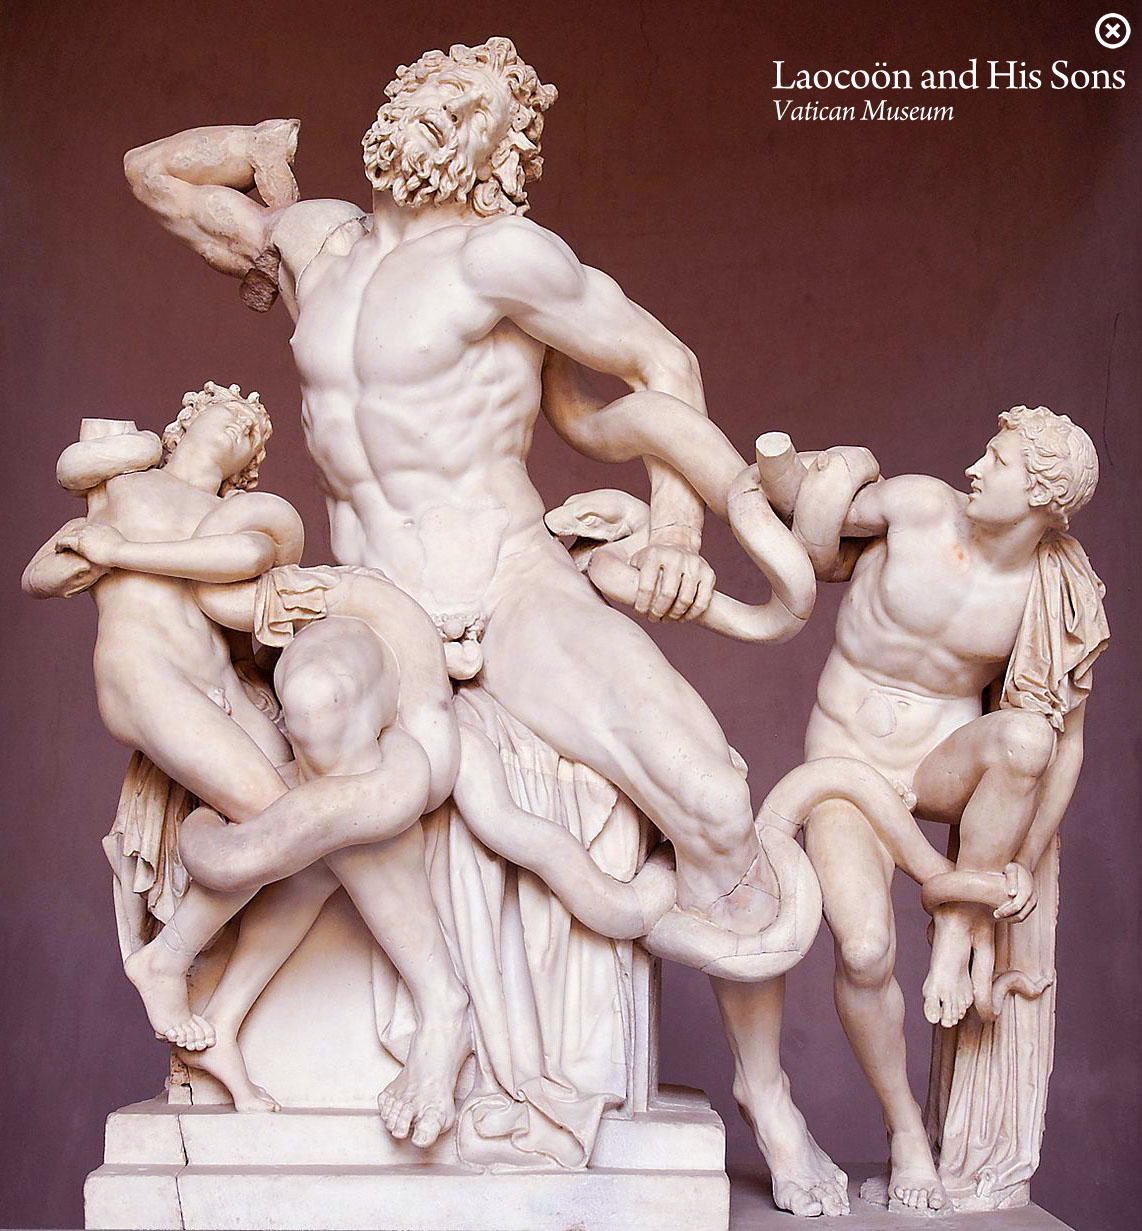 Laocoön and His Sons in the Vatican